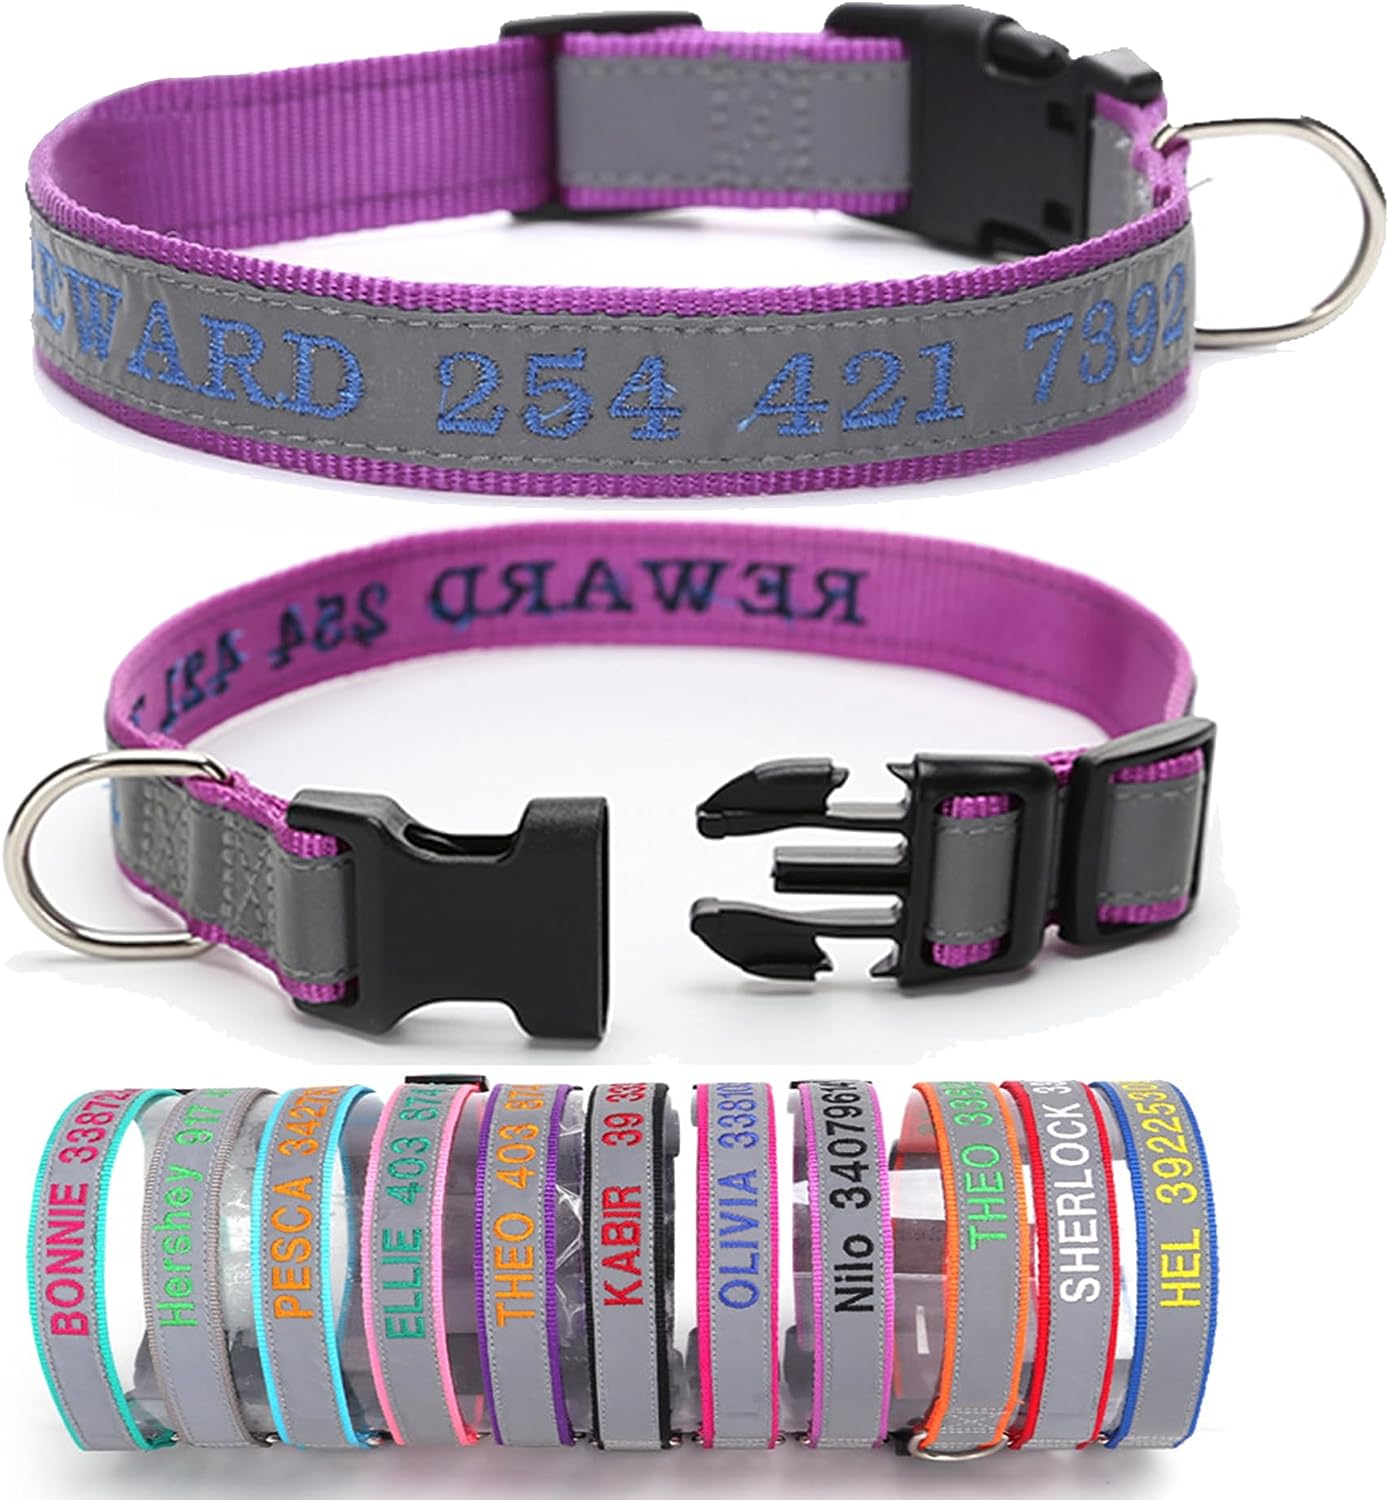 Personalized Embroidered Reflective Dog Collar,Engraved Custom Dog Collar with Name and Phone for Boy & Girl Dogs,Nylon Dog ID Collars, 4 Adjustable Sizes:X M L XL